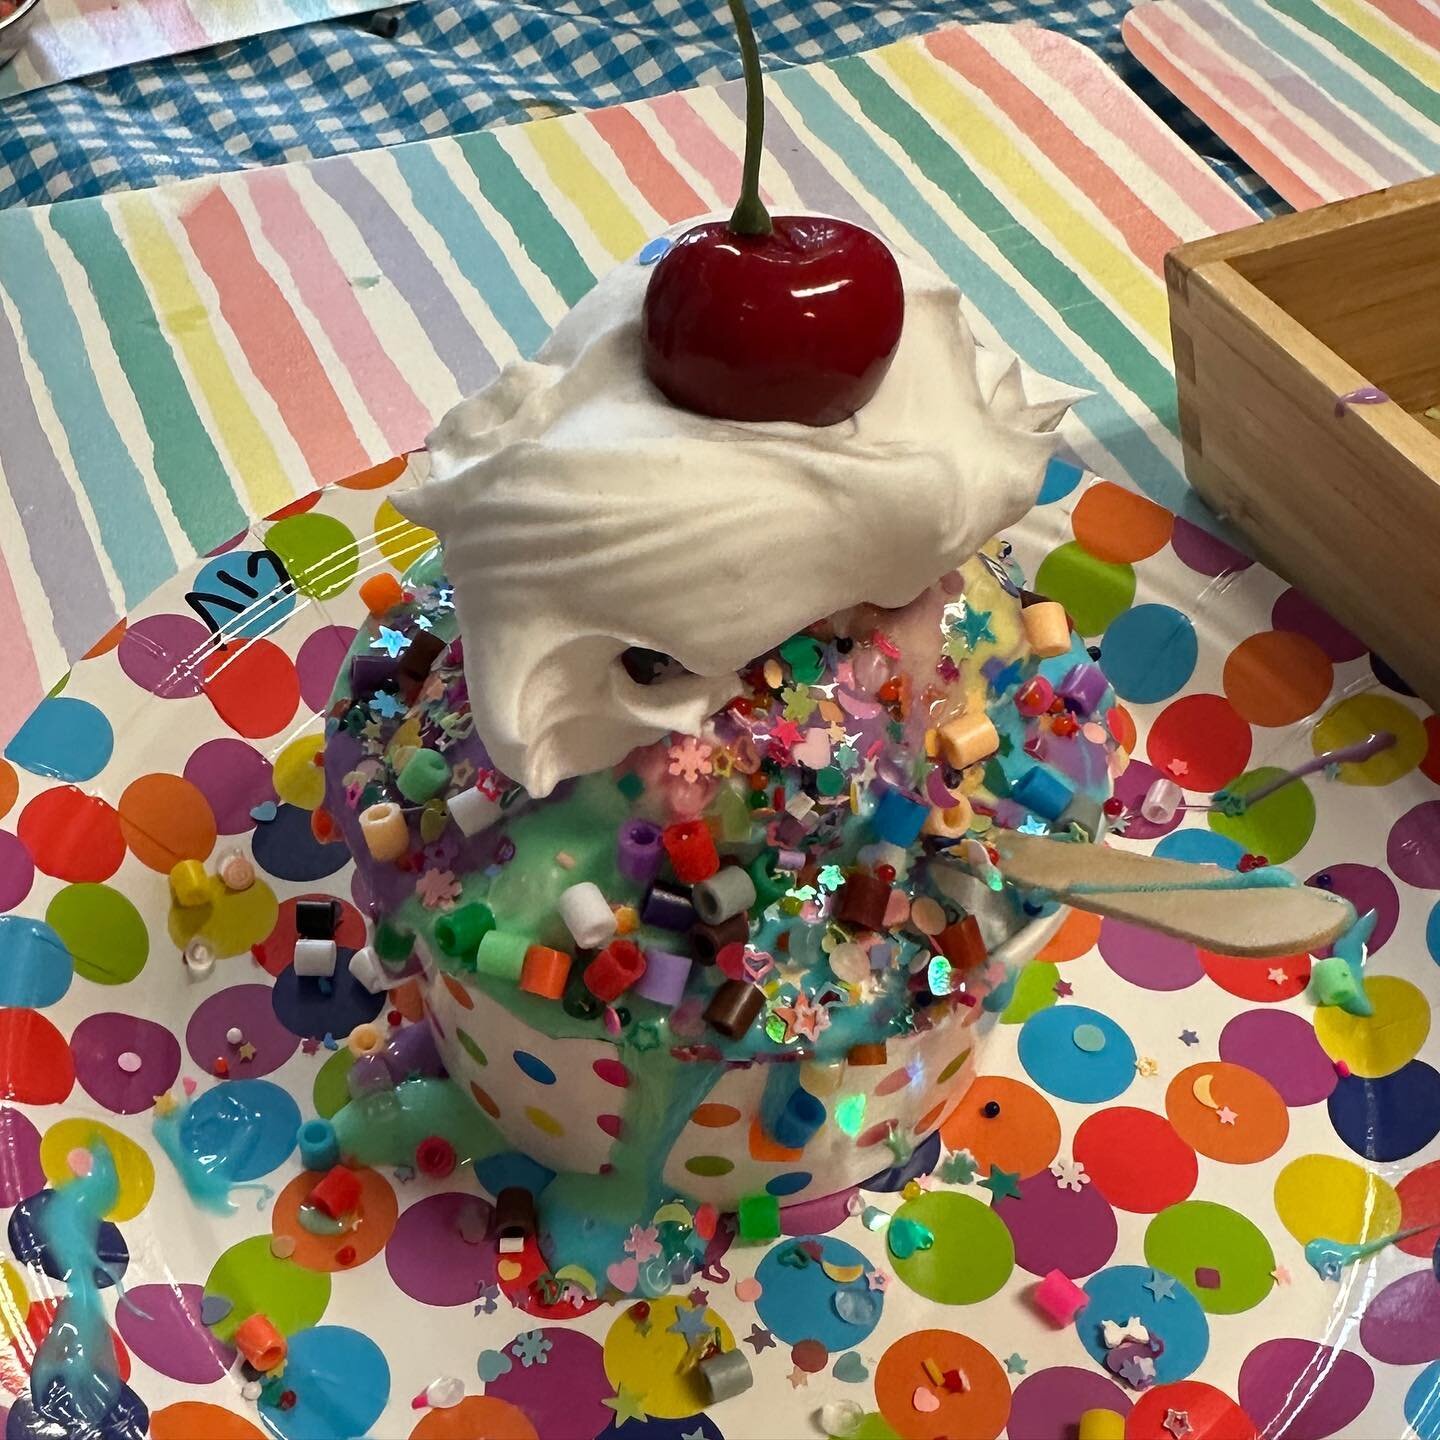 HAPPY 🥳 BIRTHDAY VIOLET! A torrential downpour could not stop the fun today! #fauxicecreamsundaes #saladspinnerart #watercolorpainting🎨 @ellisonedu @accucutcreations #diecuts @discountschoolsupply @colorations.artoflearning #glitterwatercolorpaint 